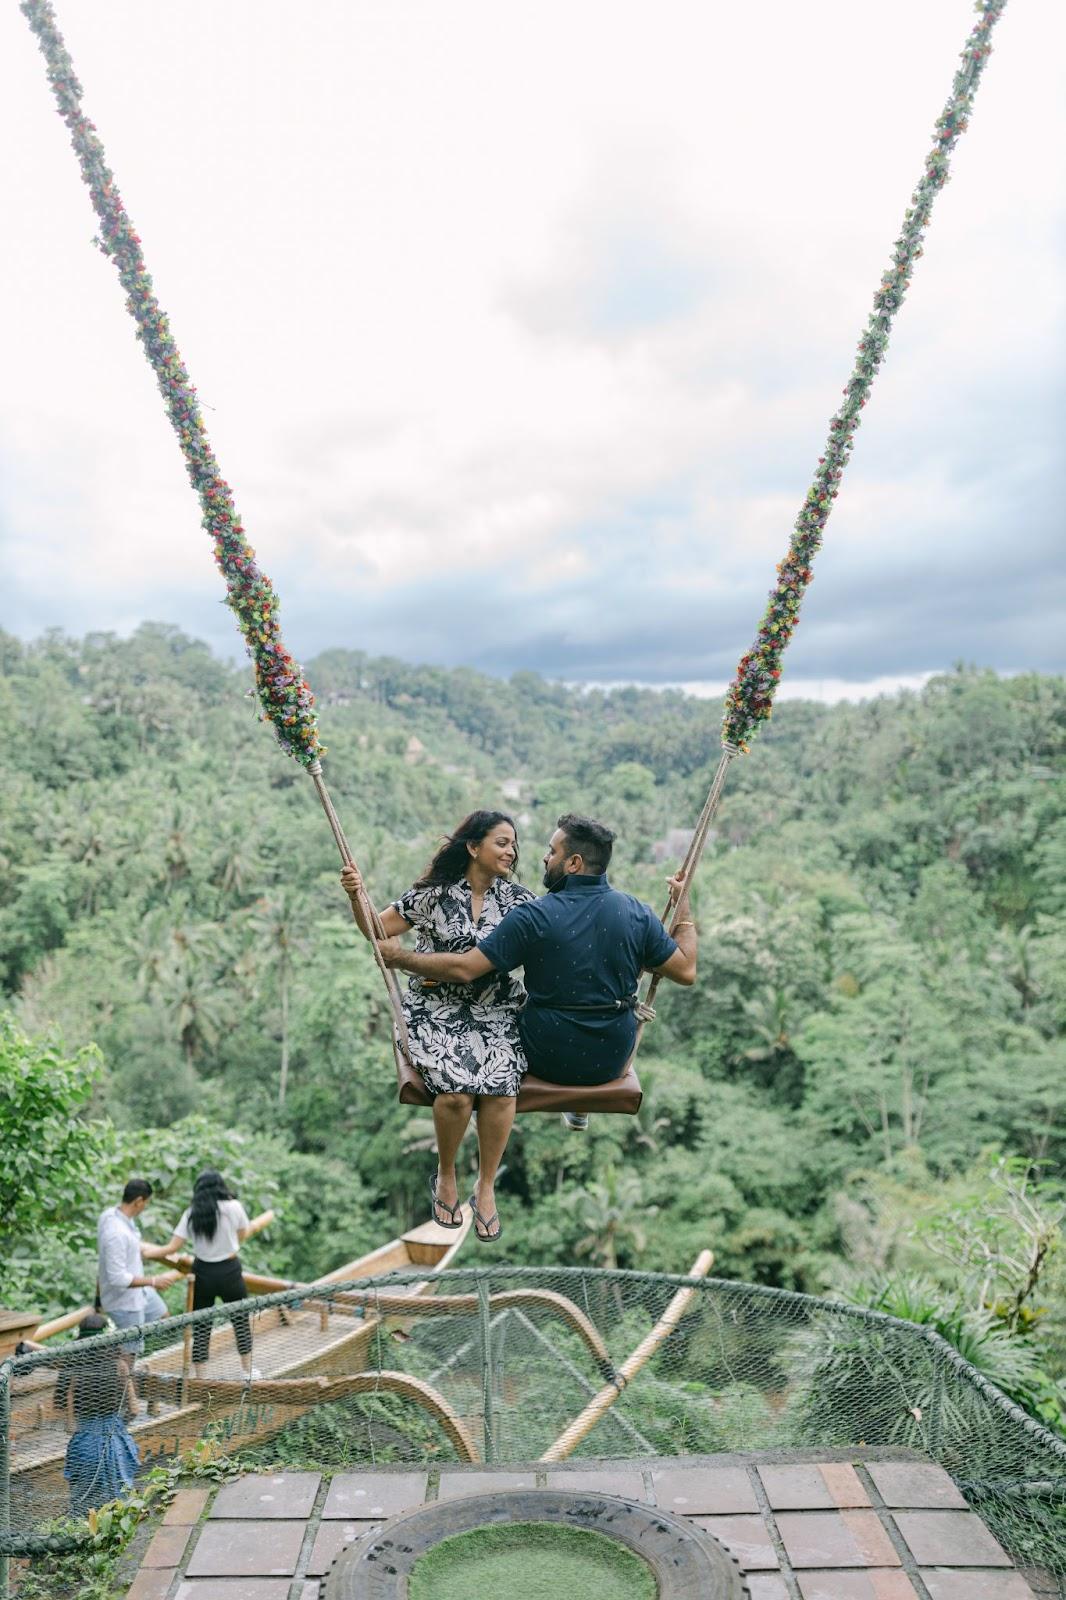 What is the most touristy part of Bali?
